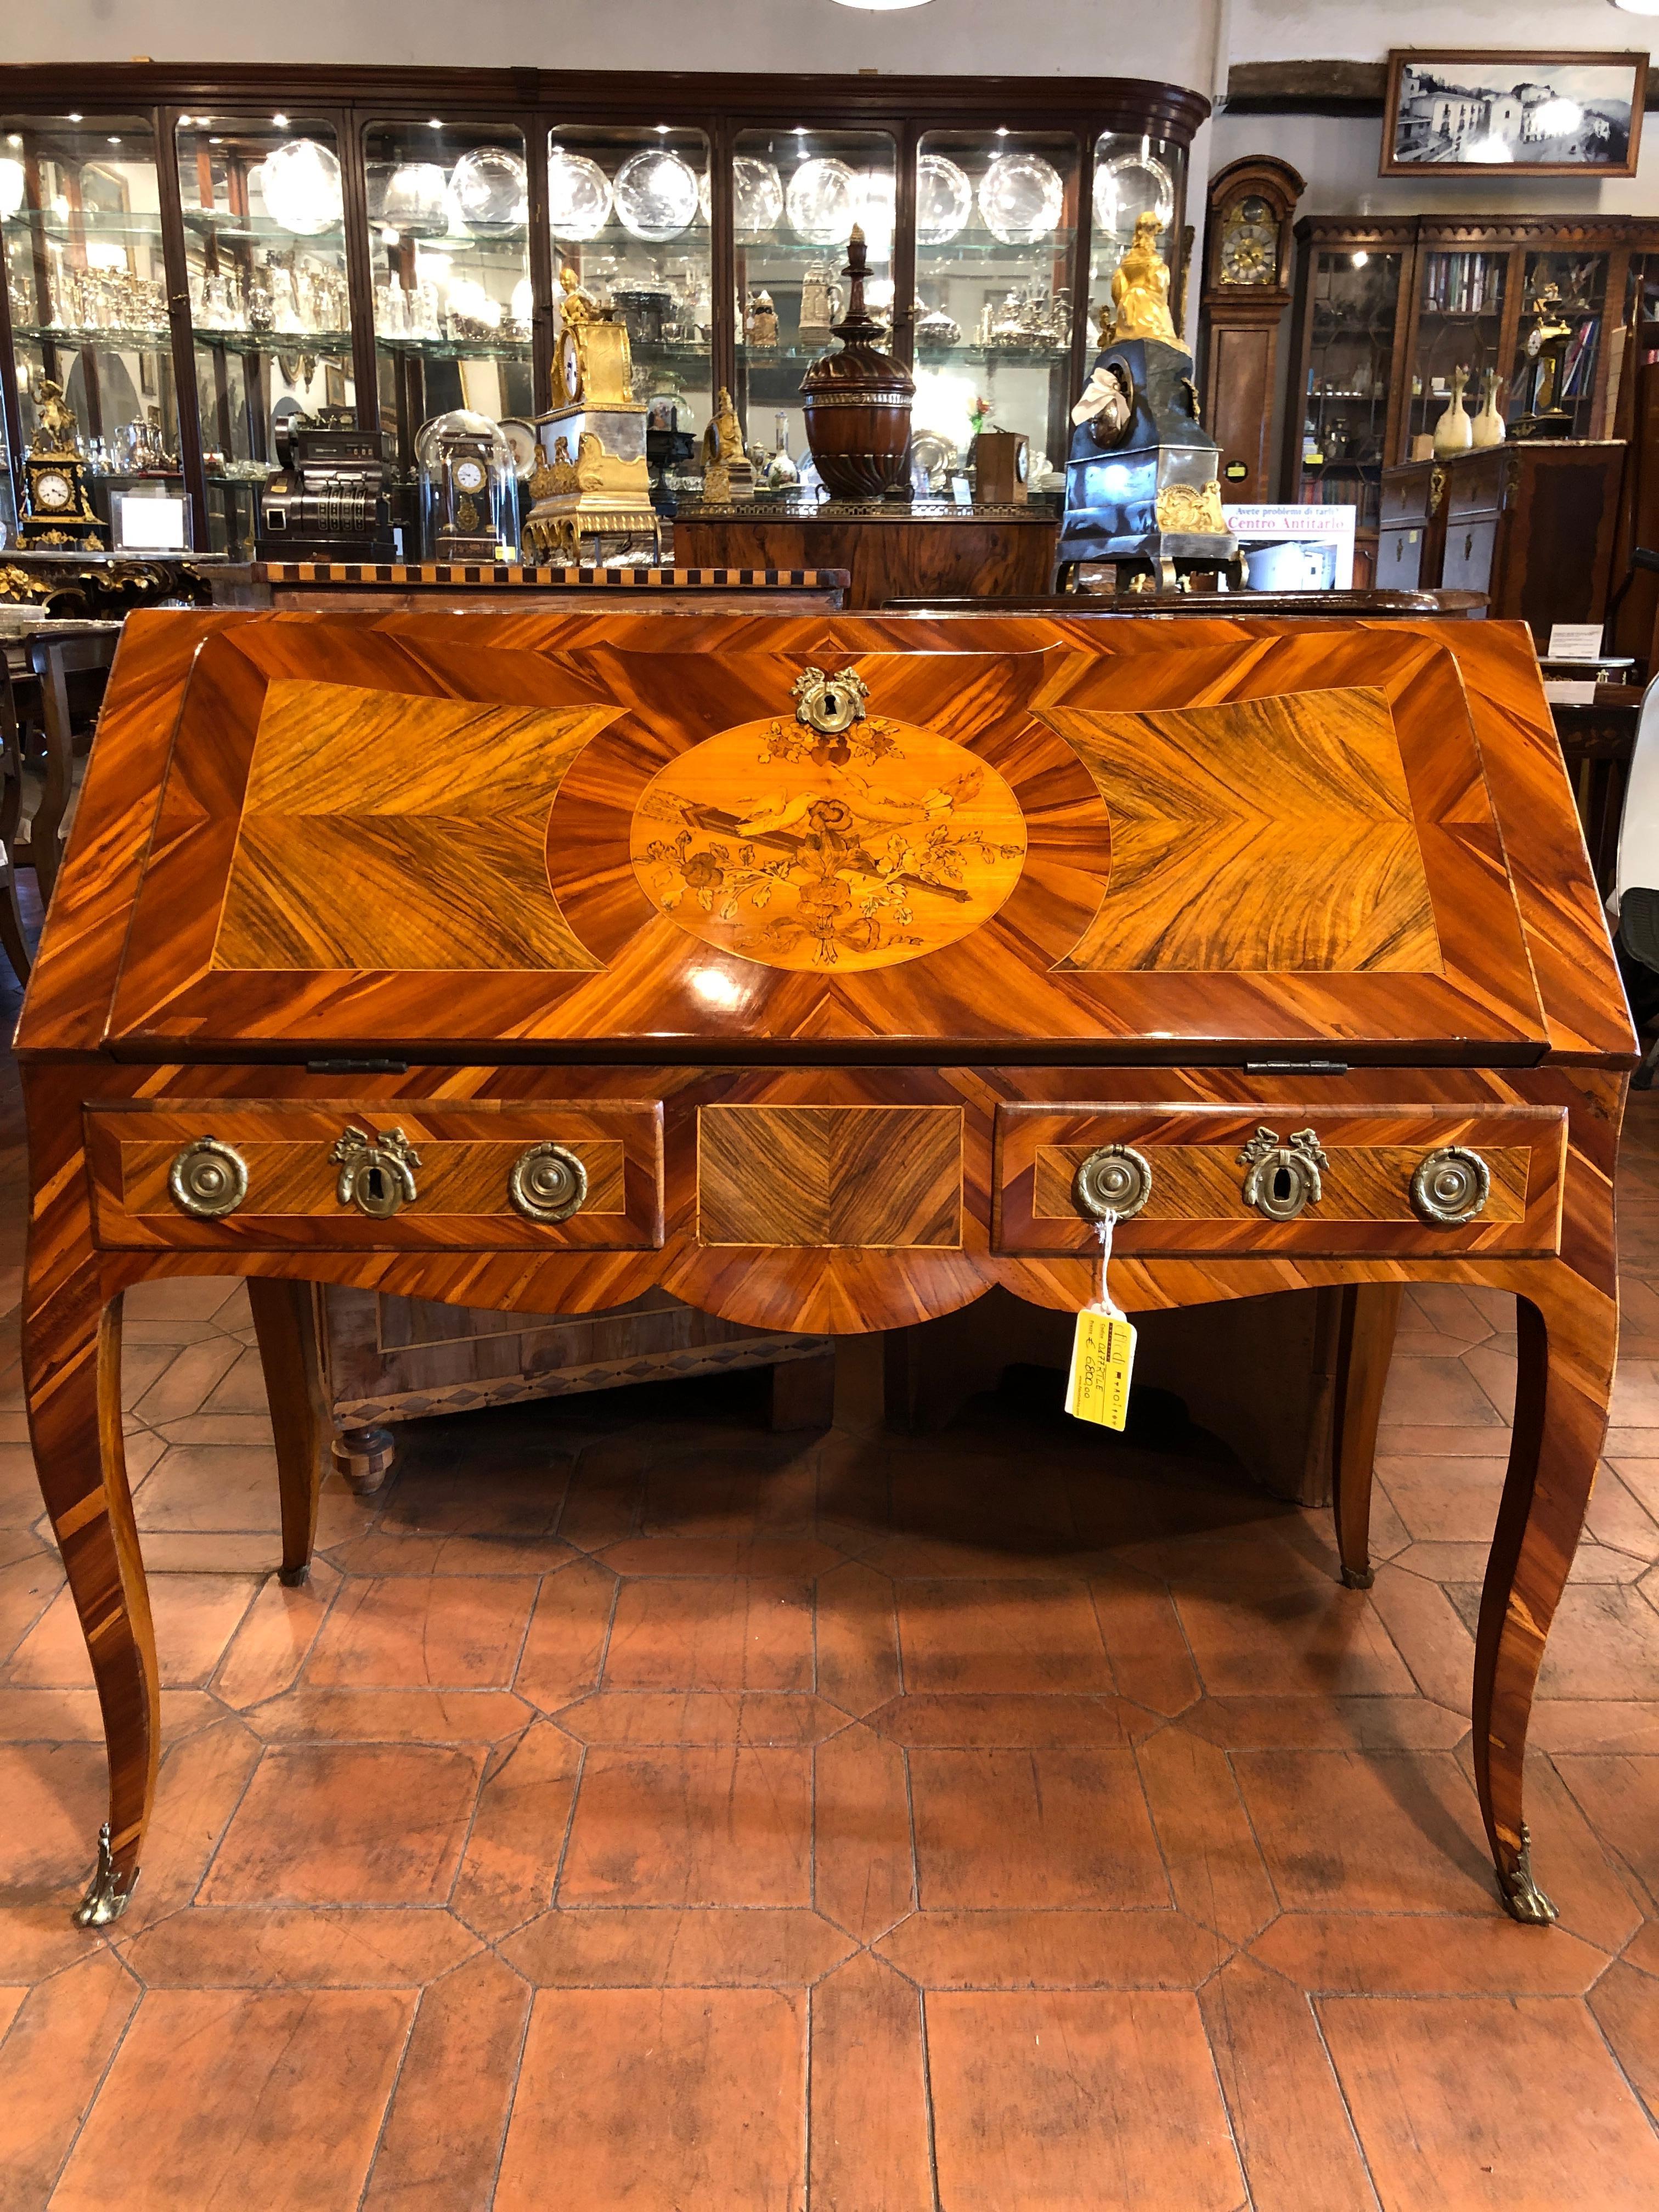 Bureau of Italian origin, city of Naples, Louis XV, circa 1760, in walnut and olive, inlays in boxwood, maple and walnut. Inlay with floral motifs and with birds.
Measures: 110 x 51 (89) x 97 H
Restored